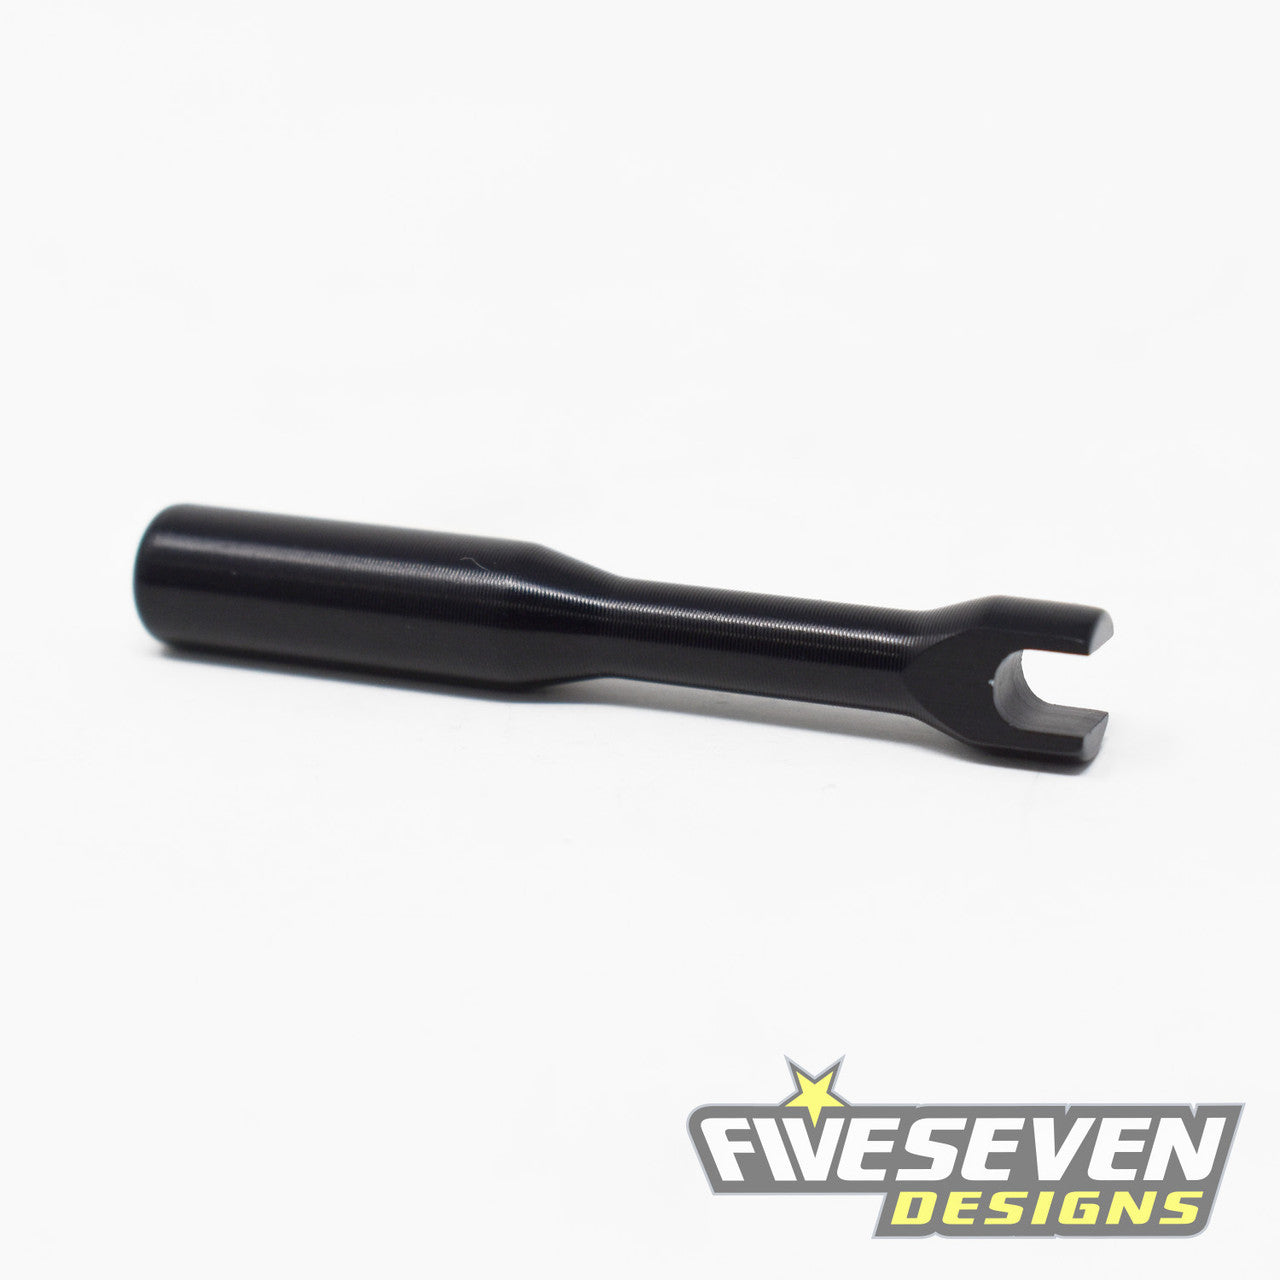 Five Seven Designs Turnbuckle Wrench 57D-1075